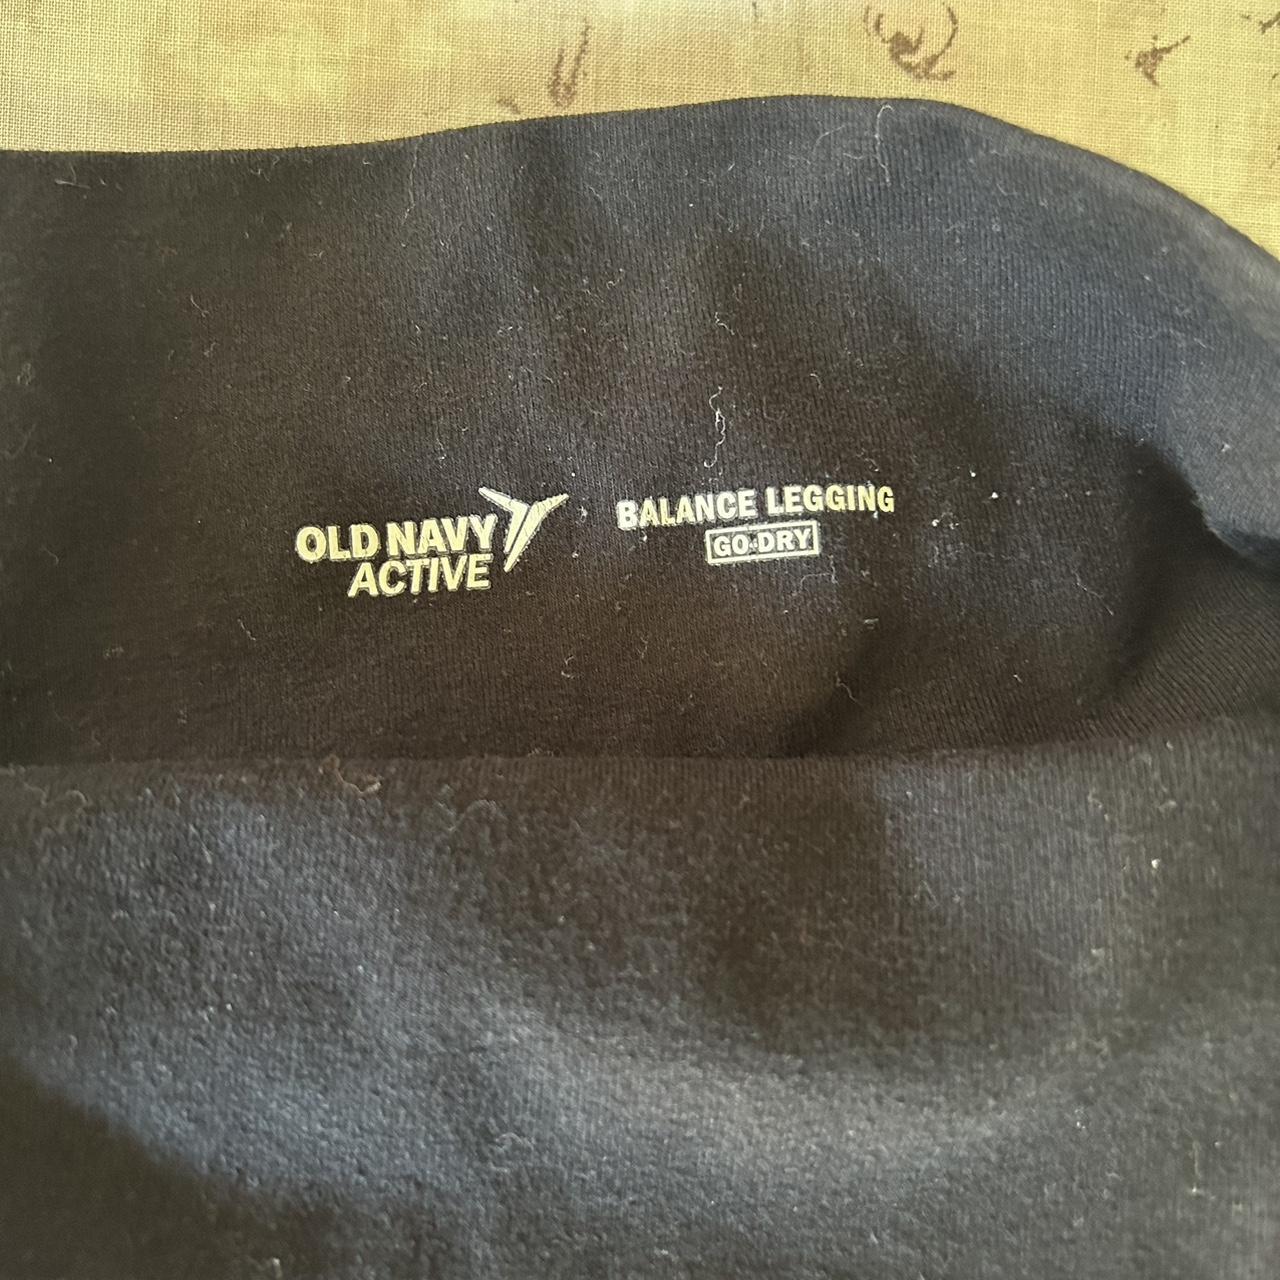 Old Navy Active 3/4 Cropped Black and White - Depop